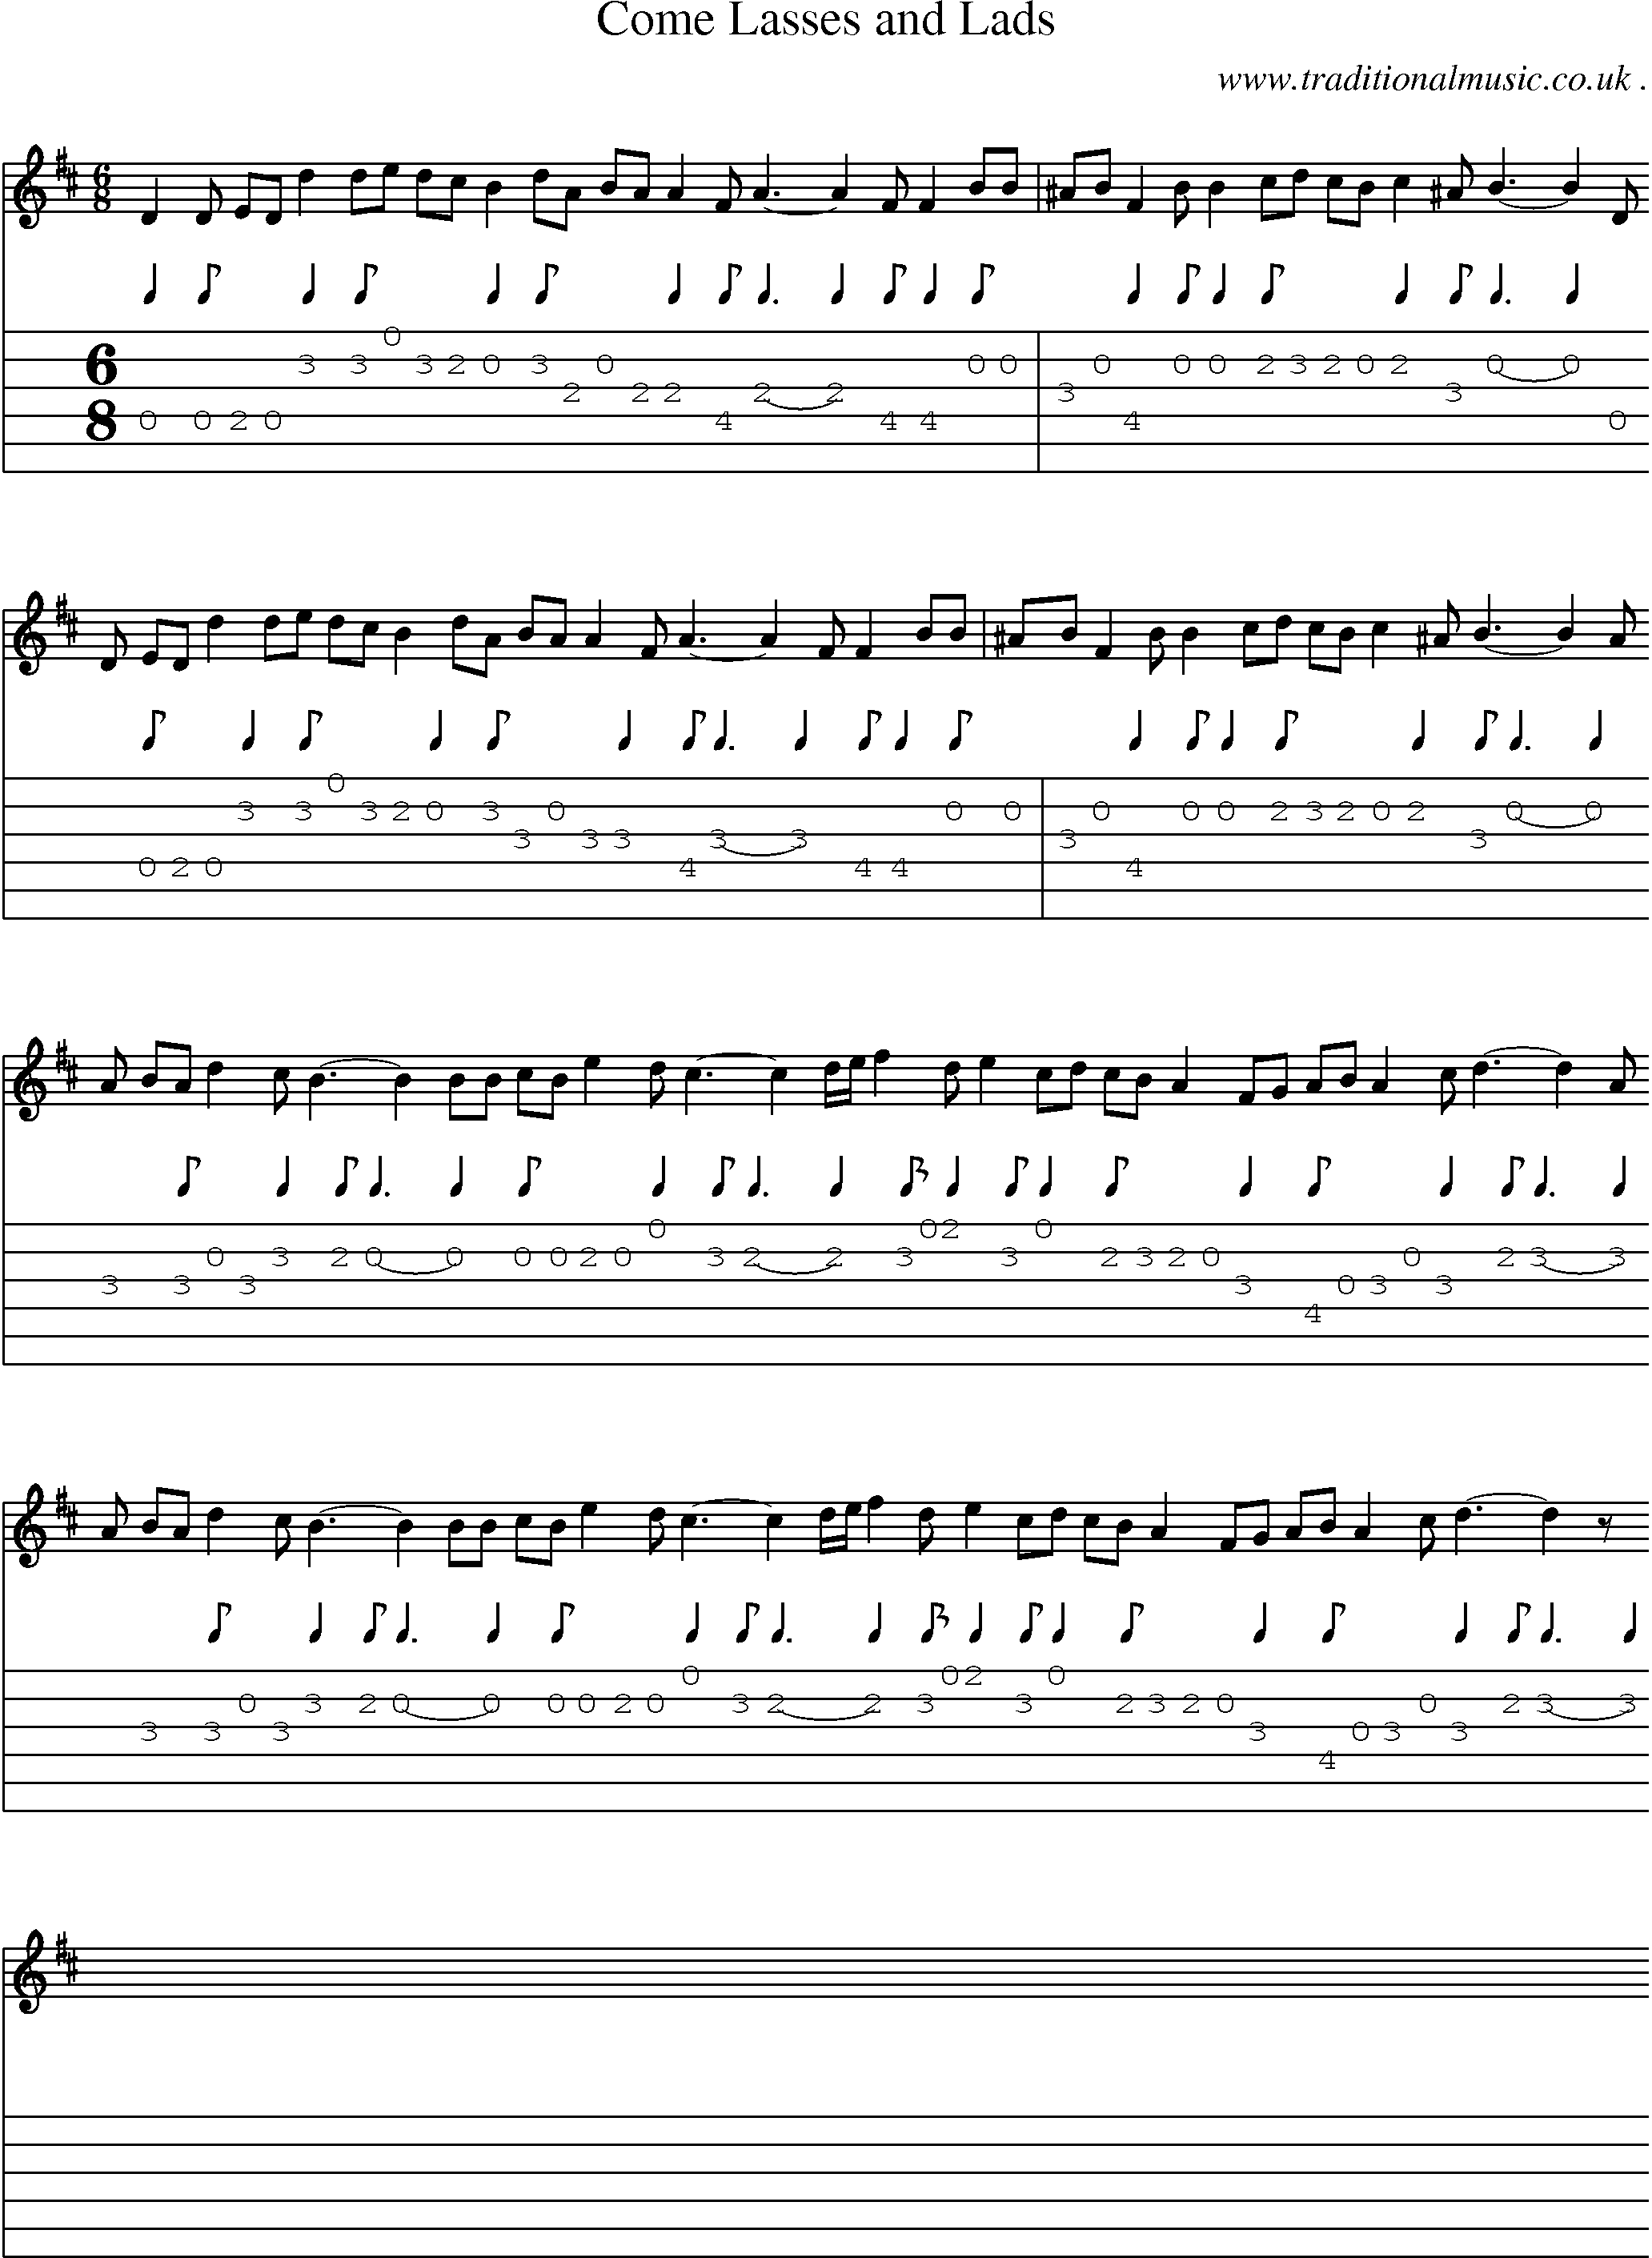 Sheet-music  score, Chords and Guitar Tabs for Come Lasses And Lads